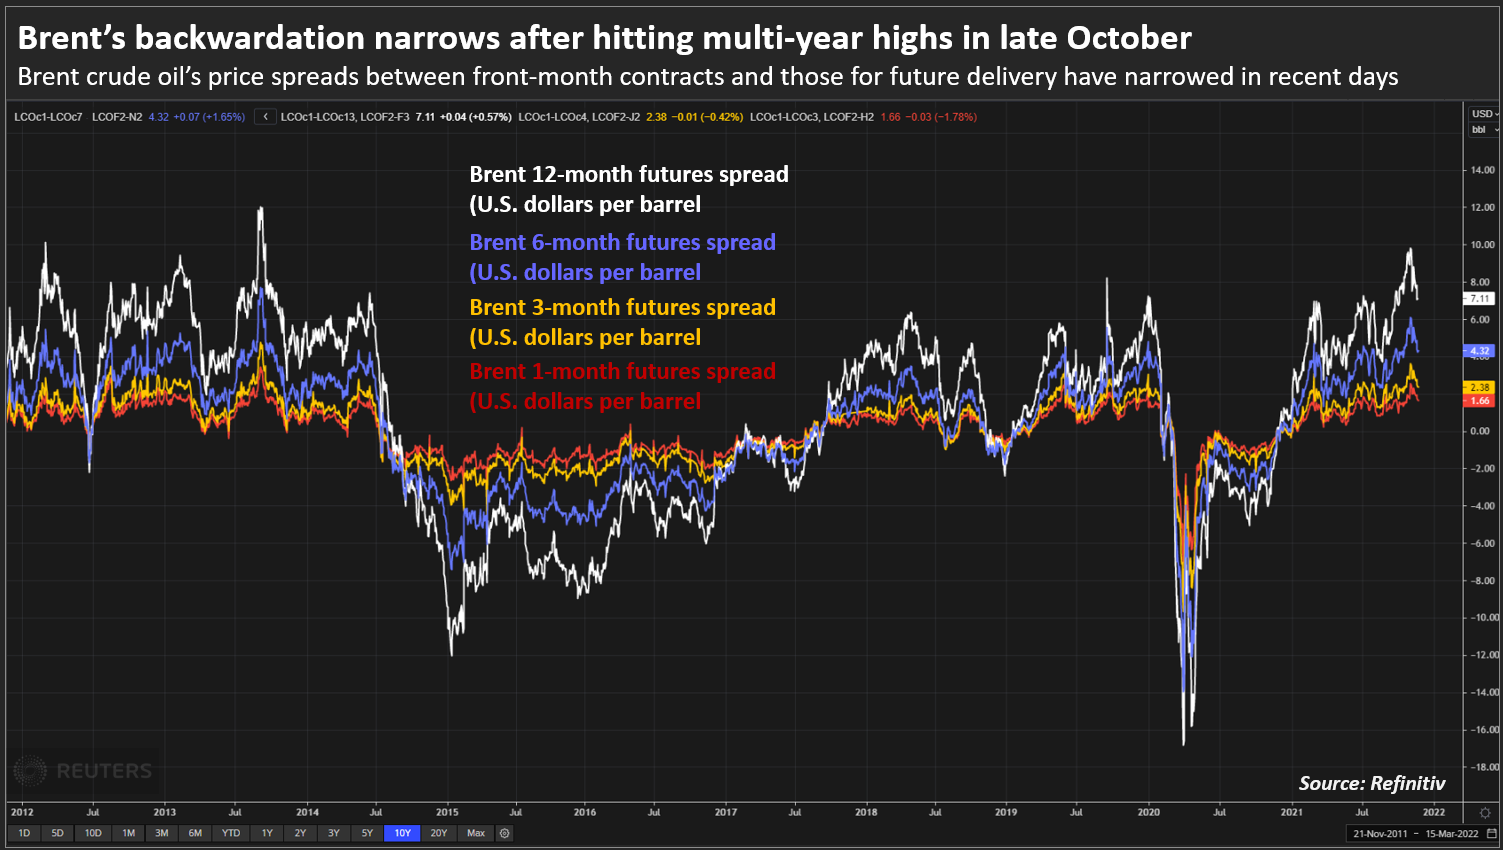 Brent’s backwardation narrows after hitting multi-year highs in late October